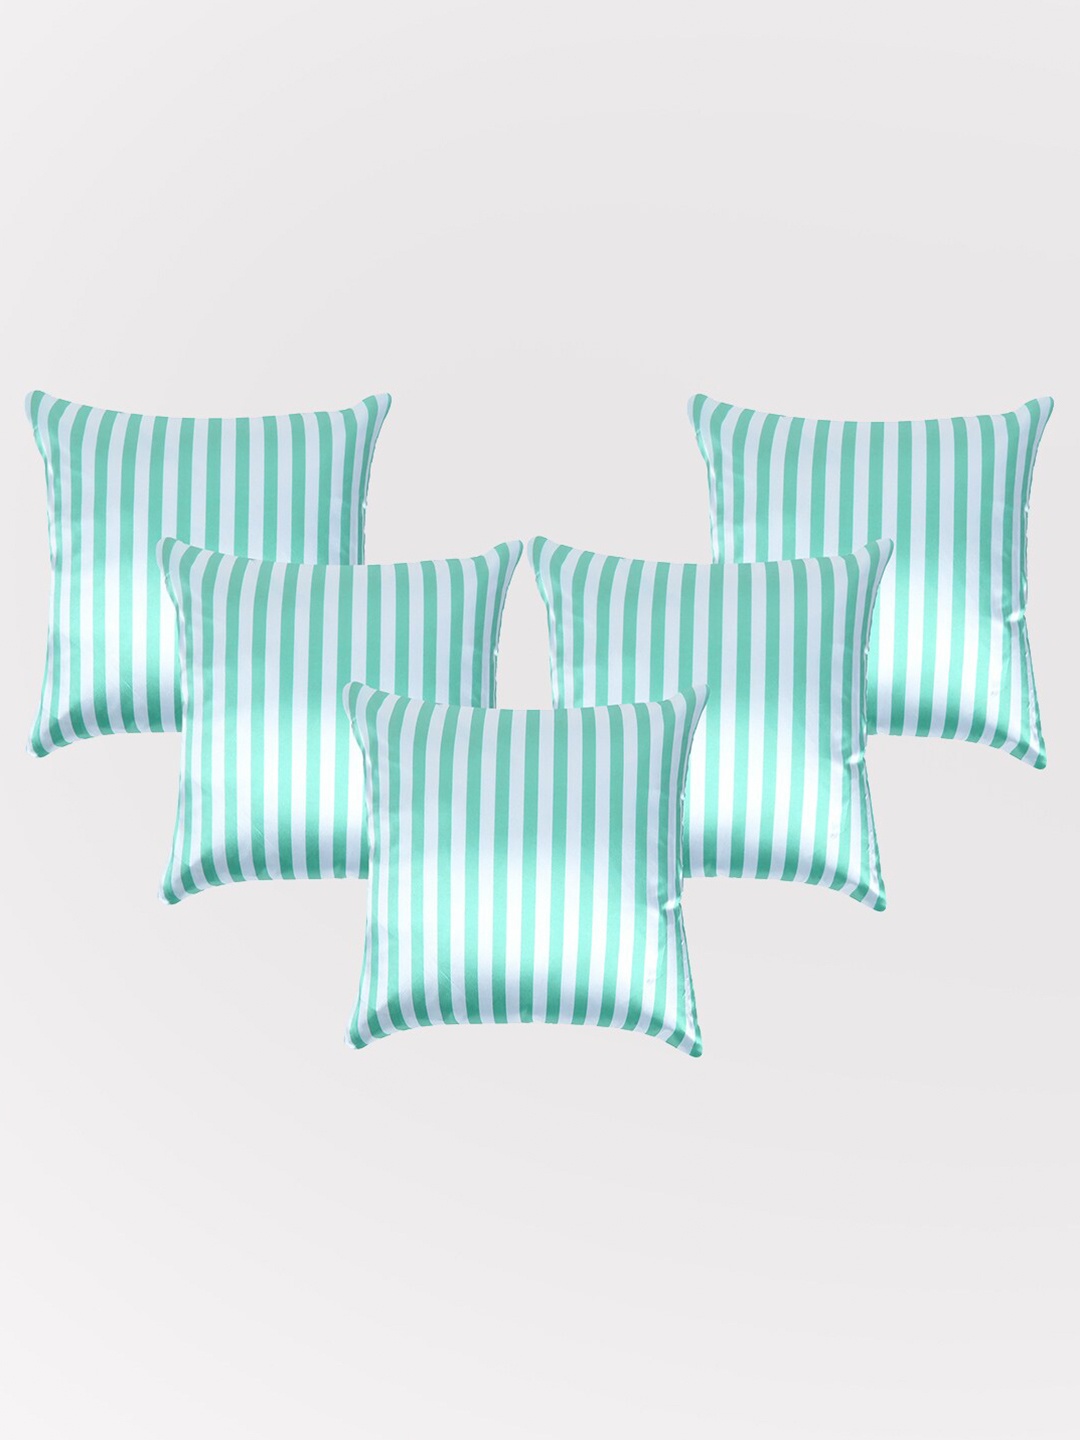 

OUSSUM Green & White 5 Pieces Striped Satin Square Cushion Covers